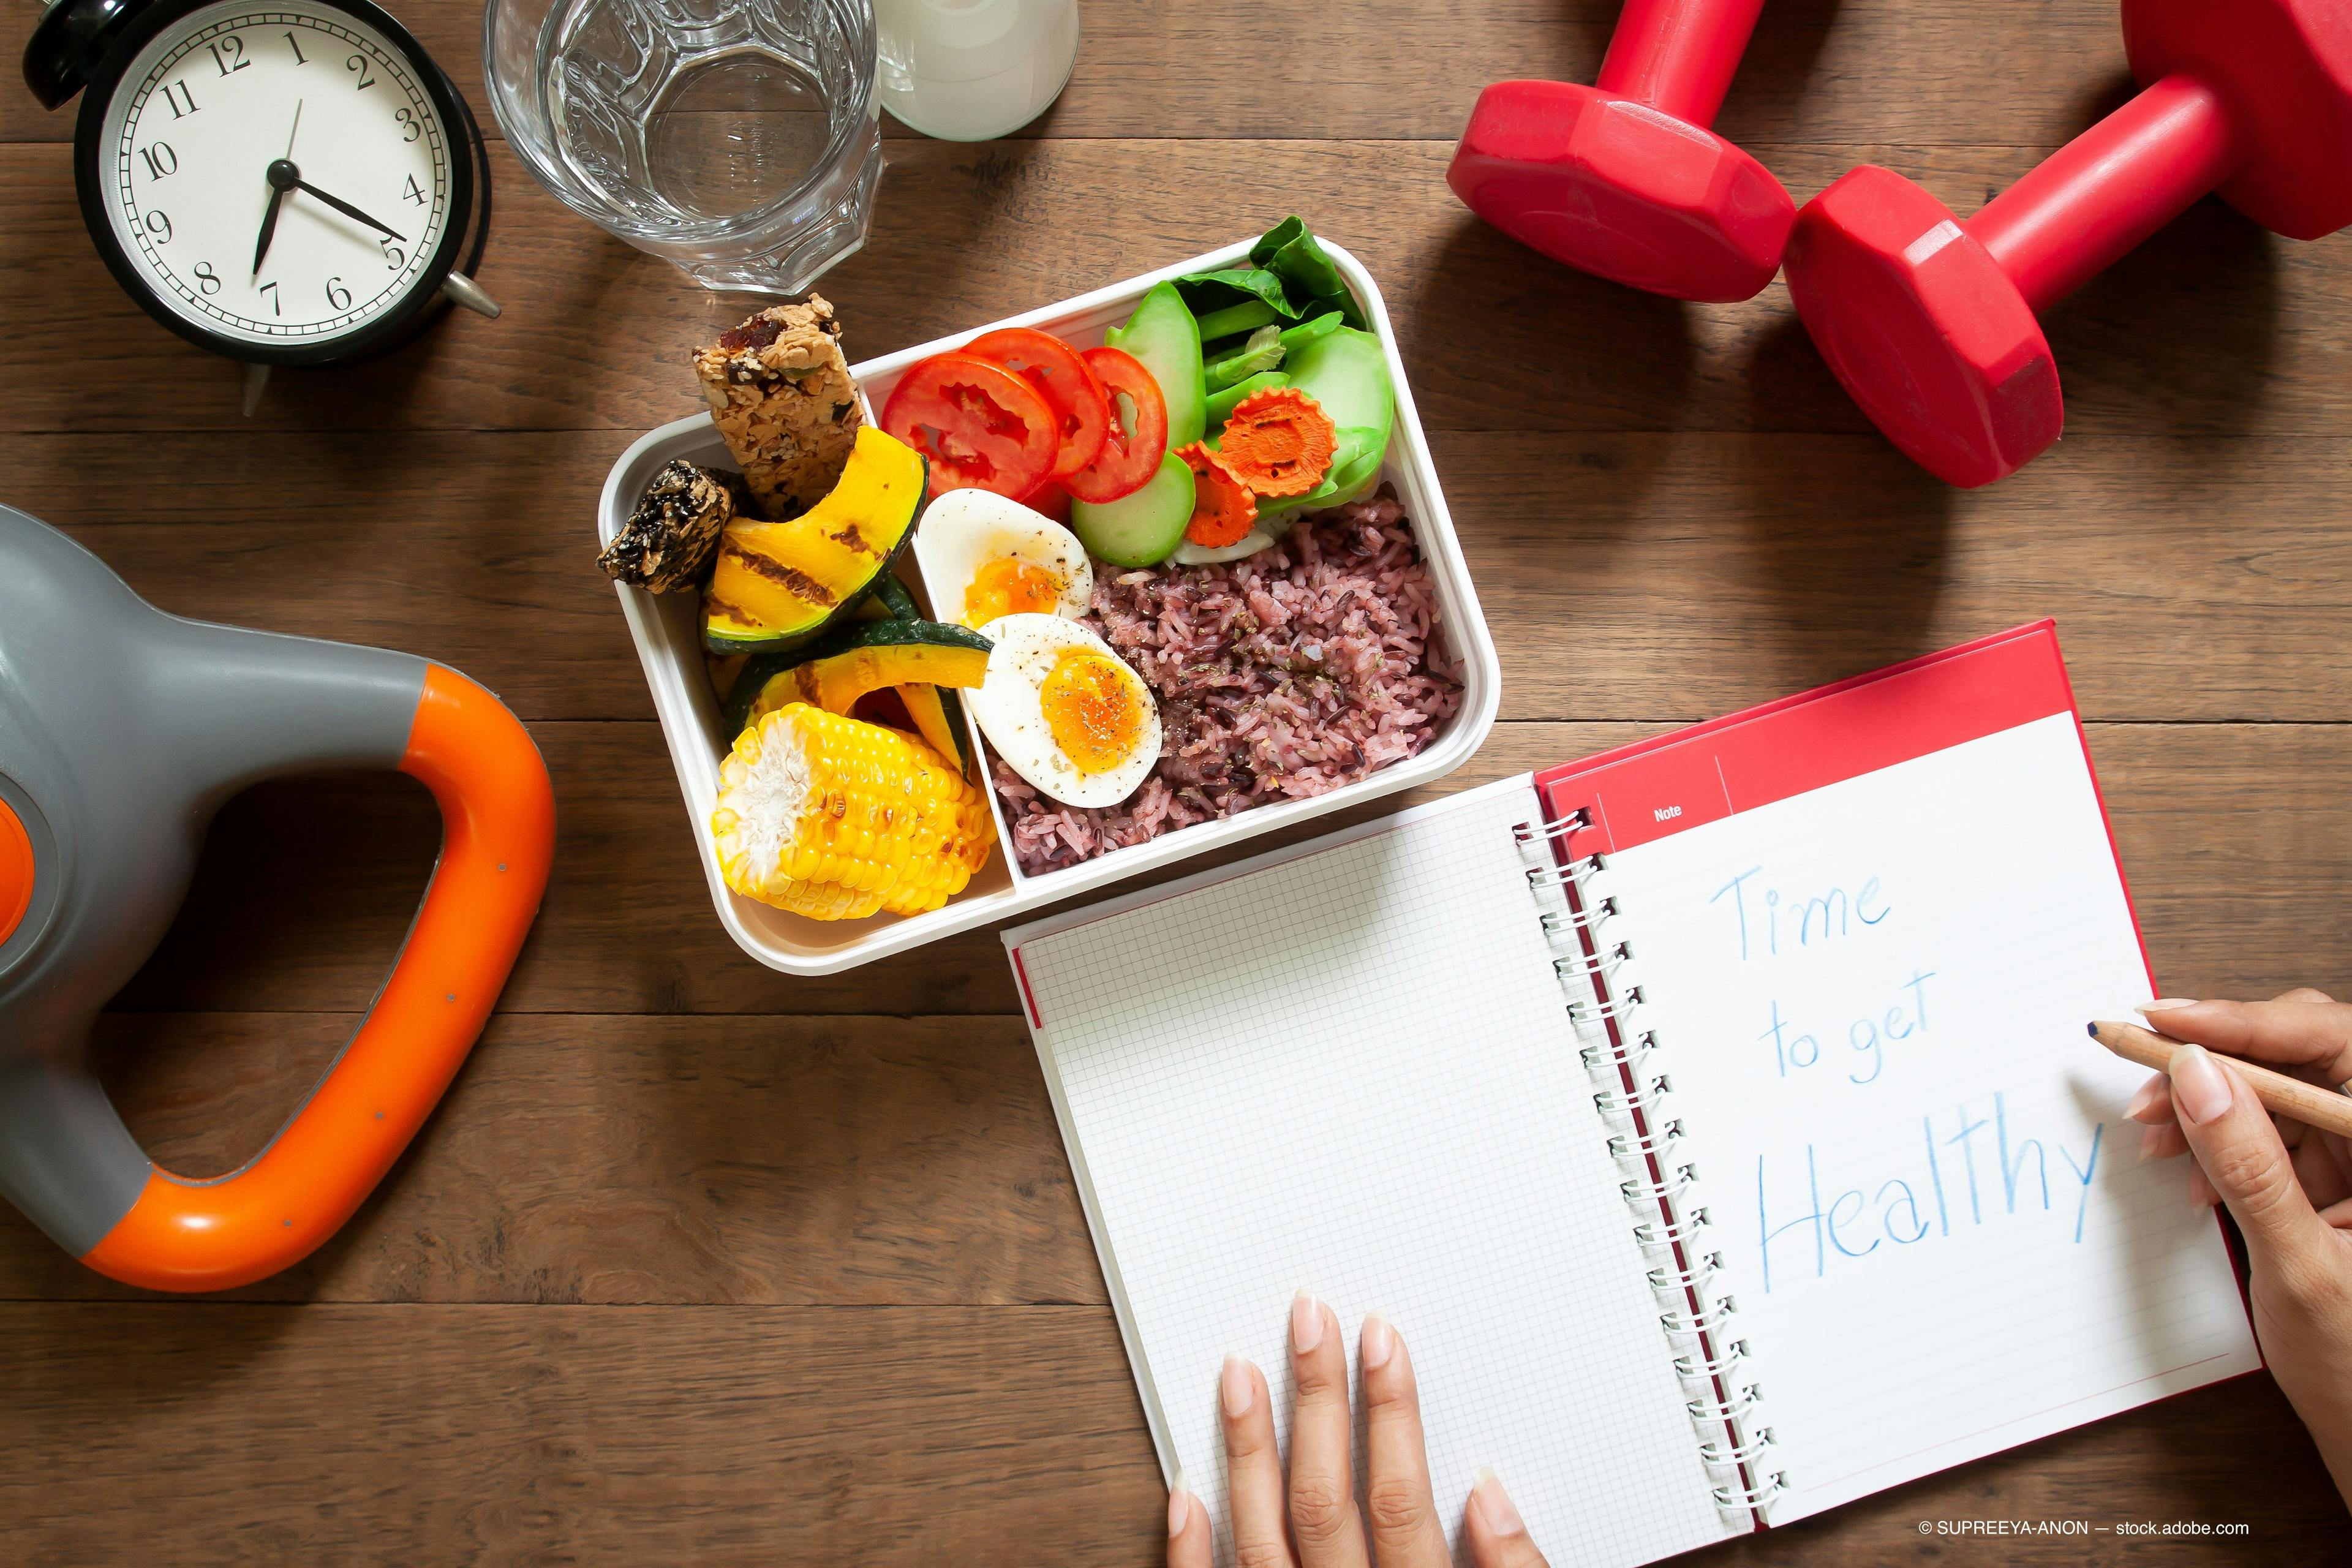 6 healthy habits that don’t cost a fortune